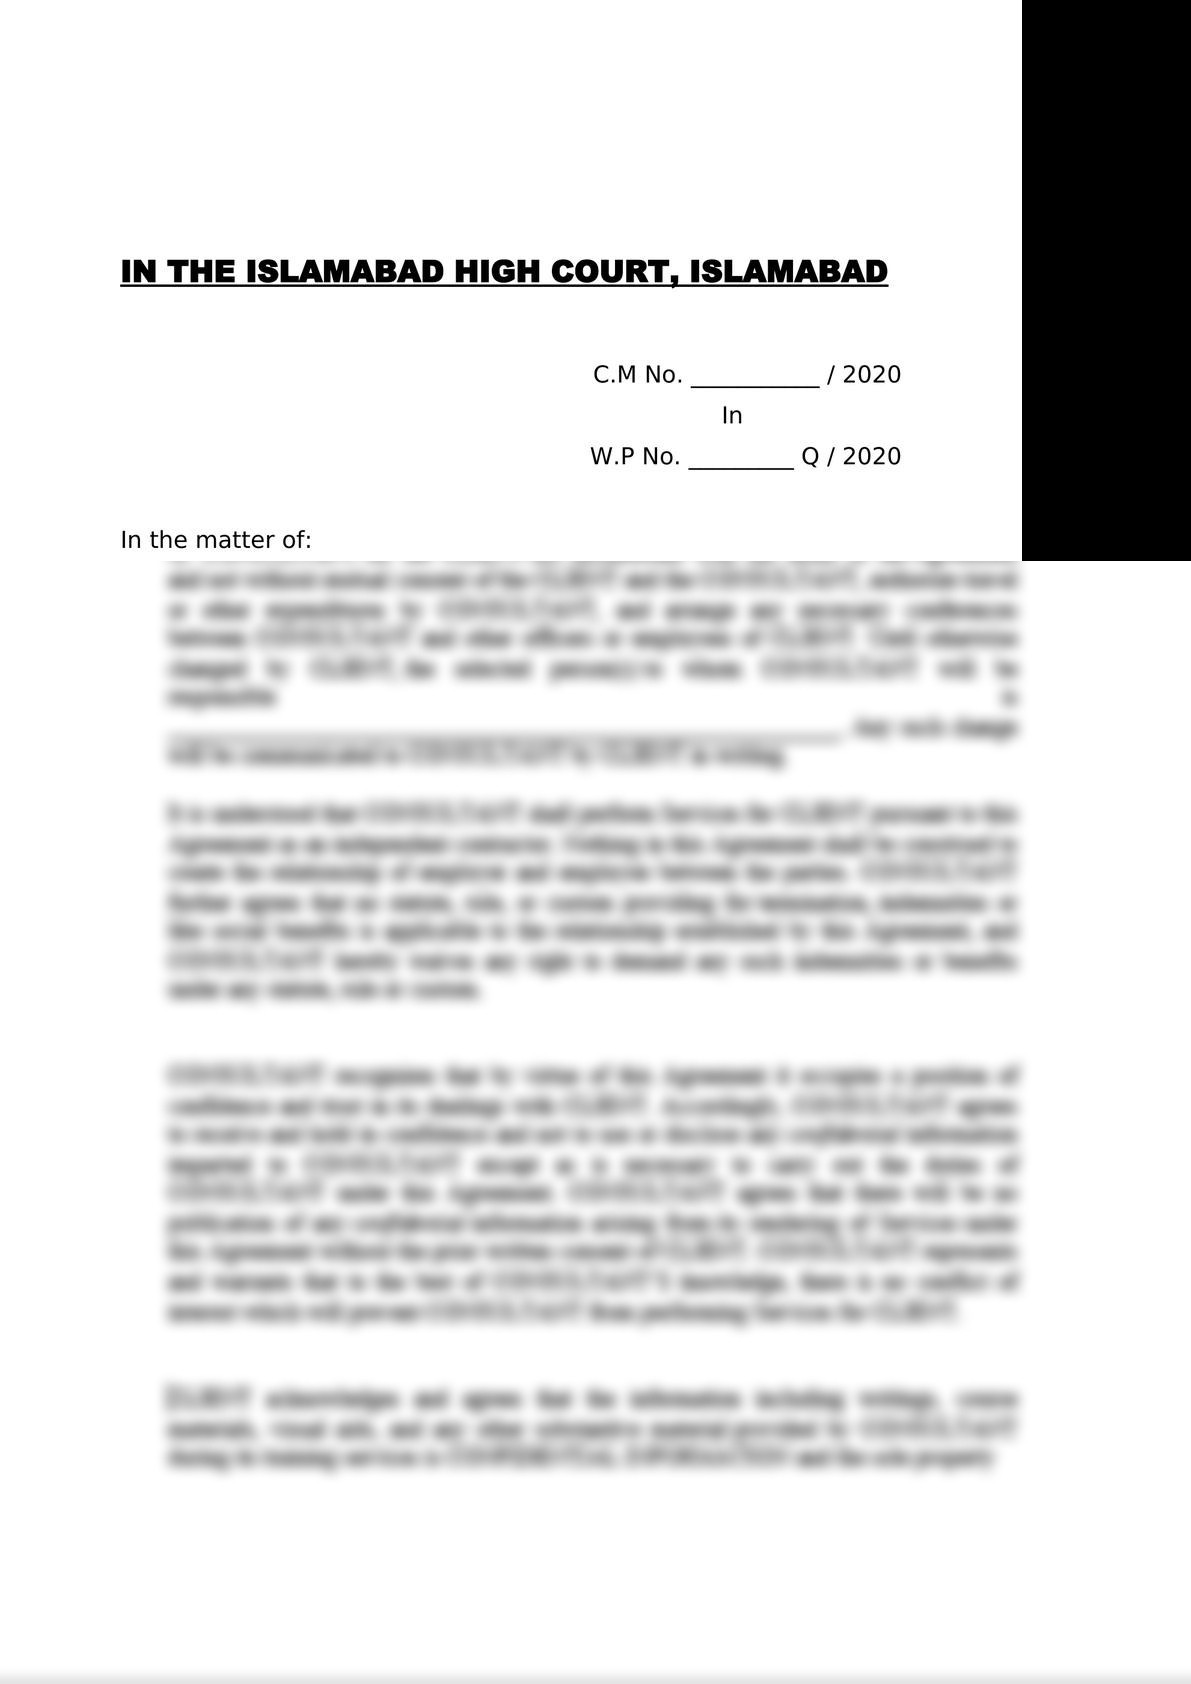 Writ Petition Under Article 199 Of The Constitution Of Pakistan, 1973 For Quashment Of FIR-5